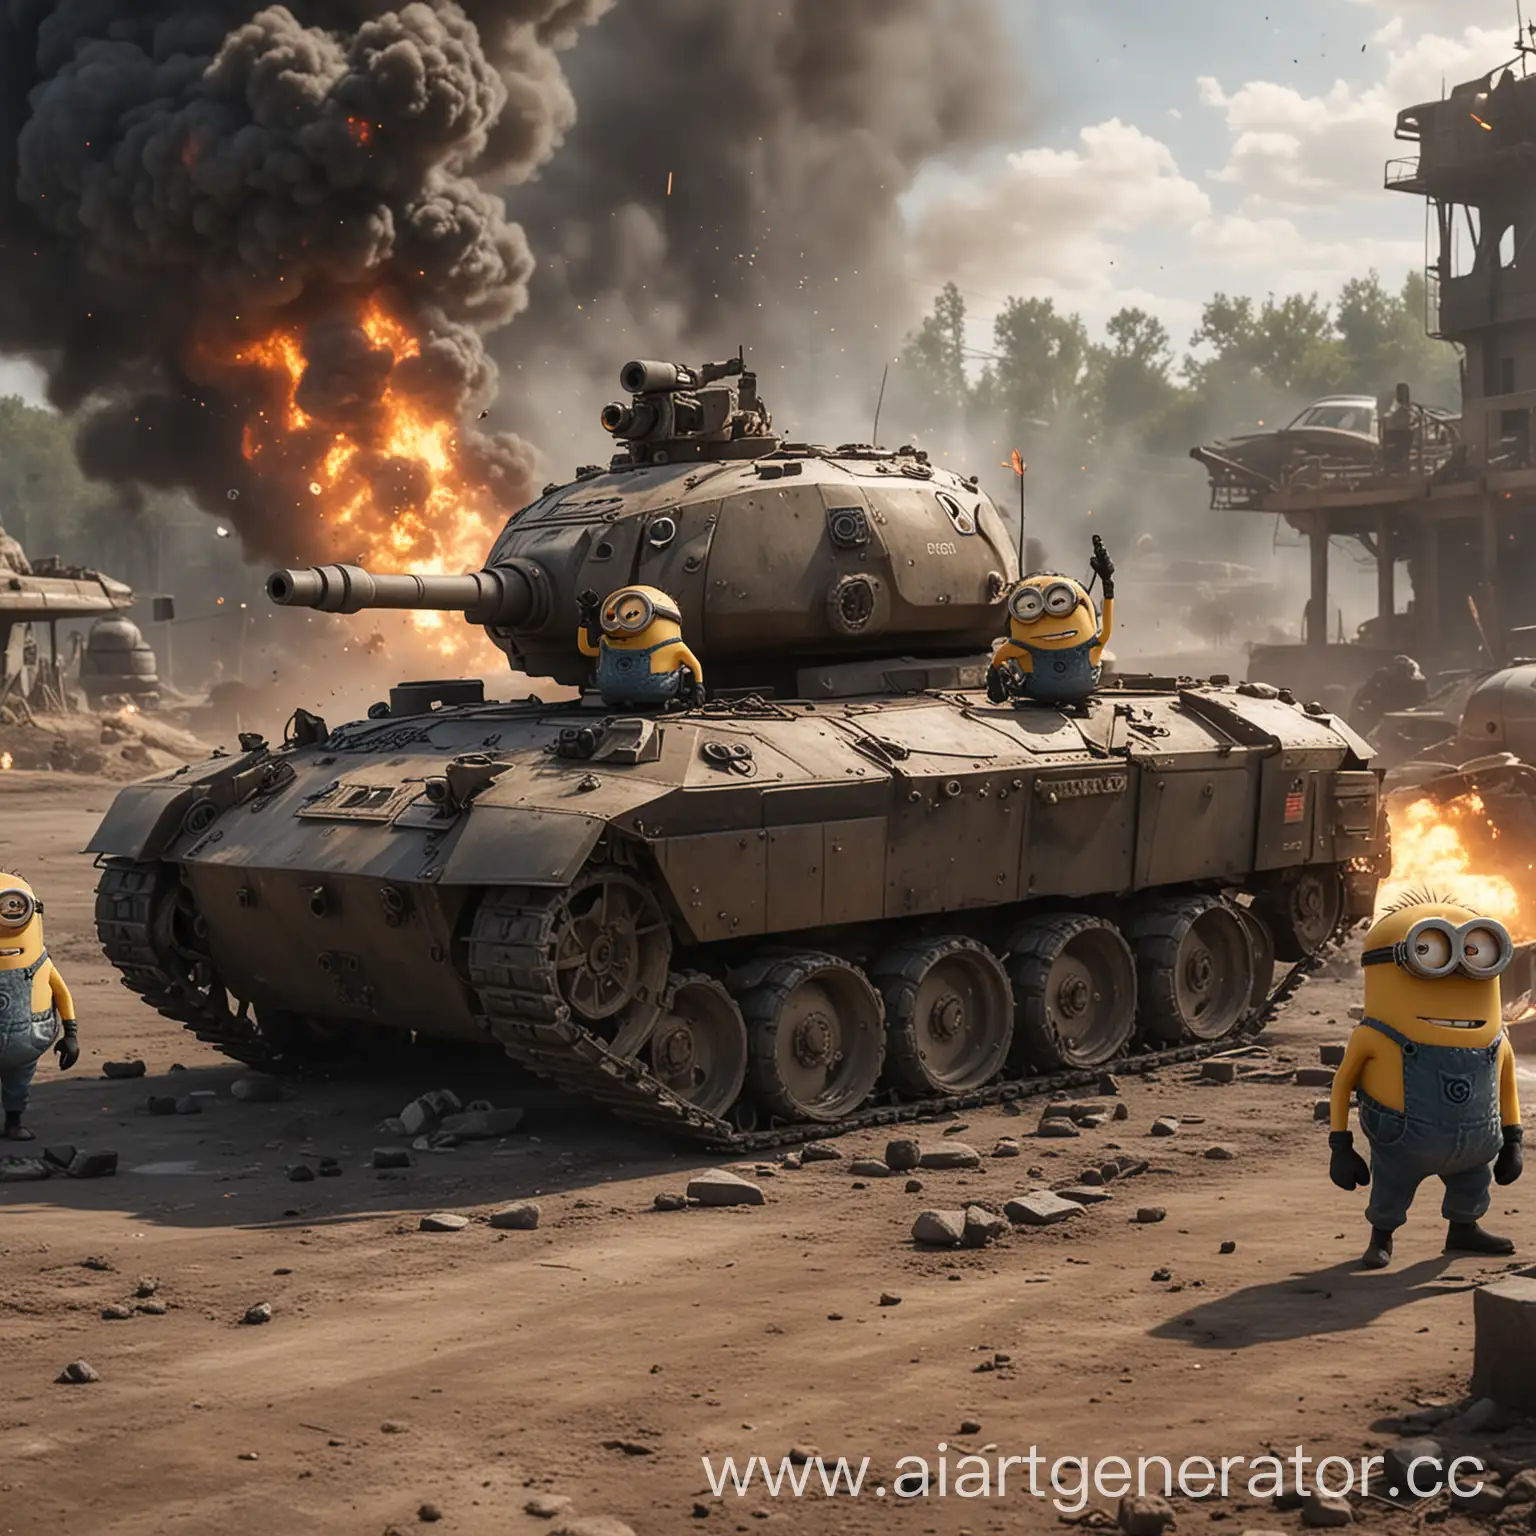 Minions-in-Bulletproof-Vests-by-a-Tank-Amid-Explosions